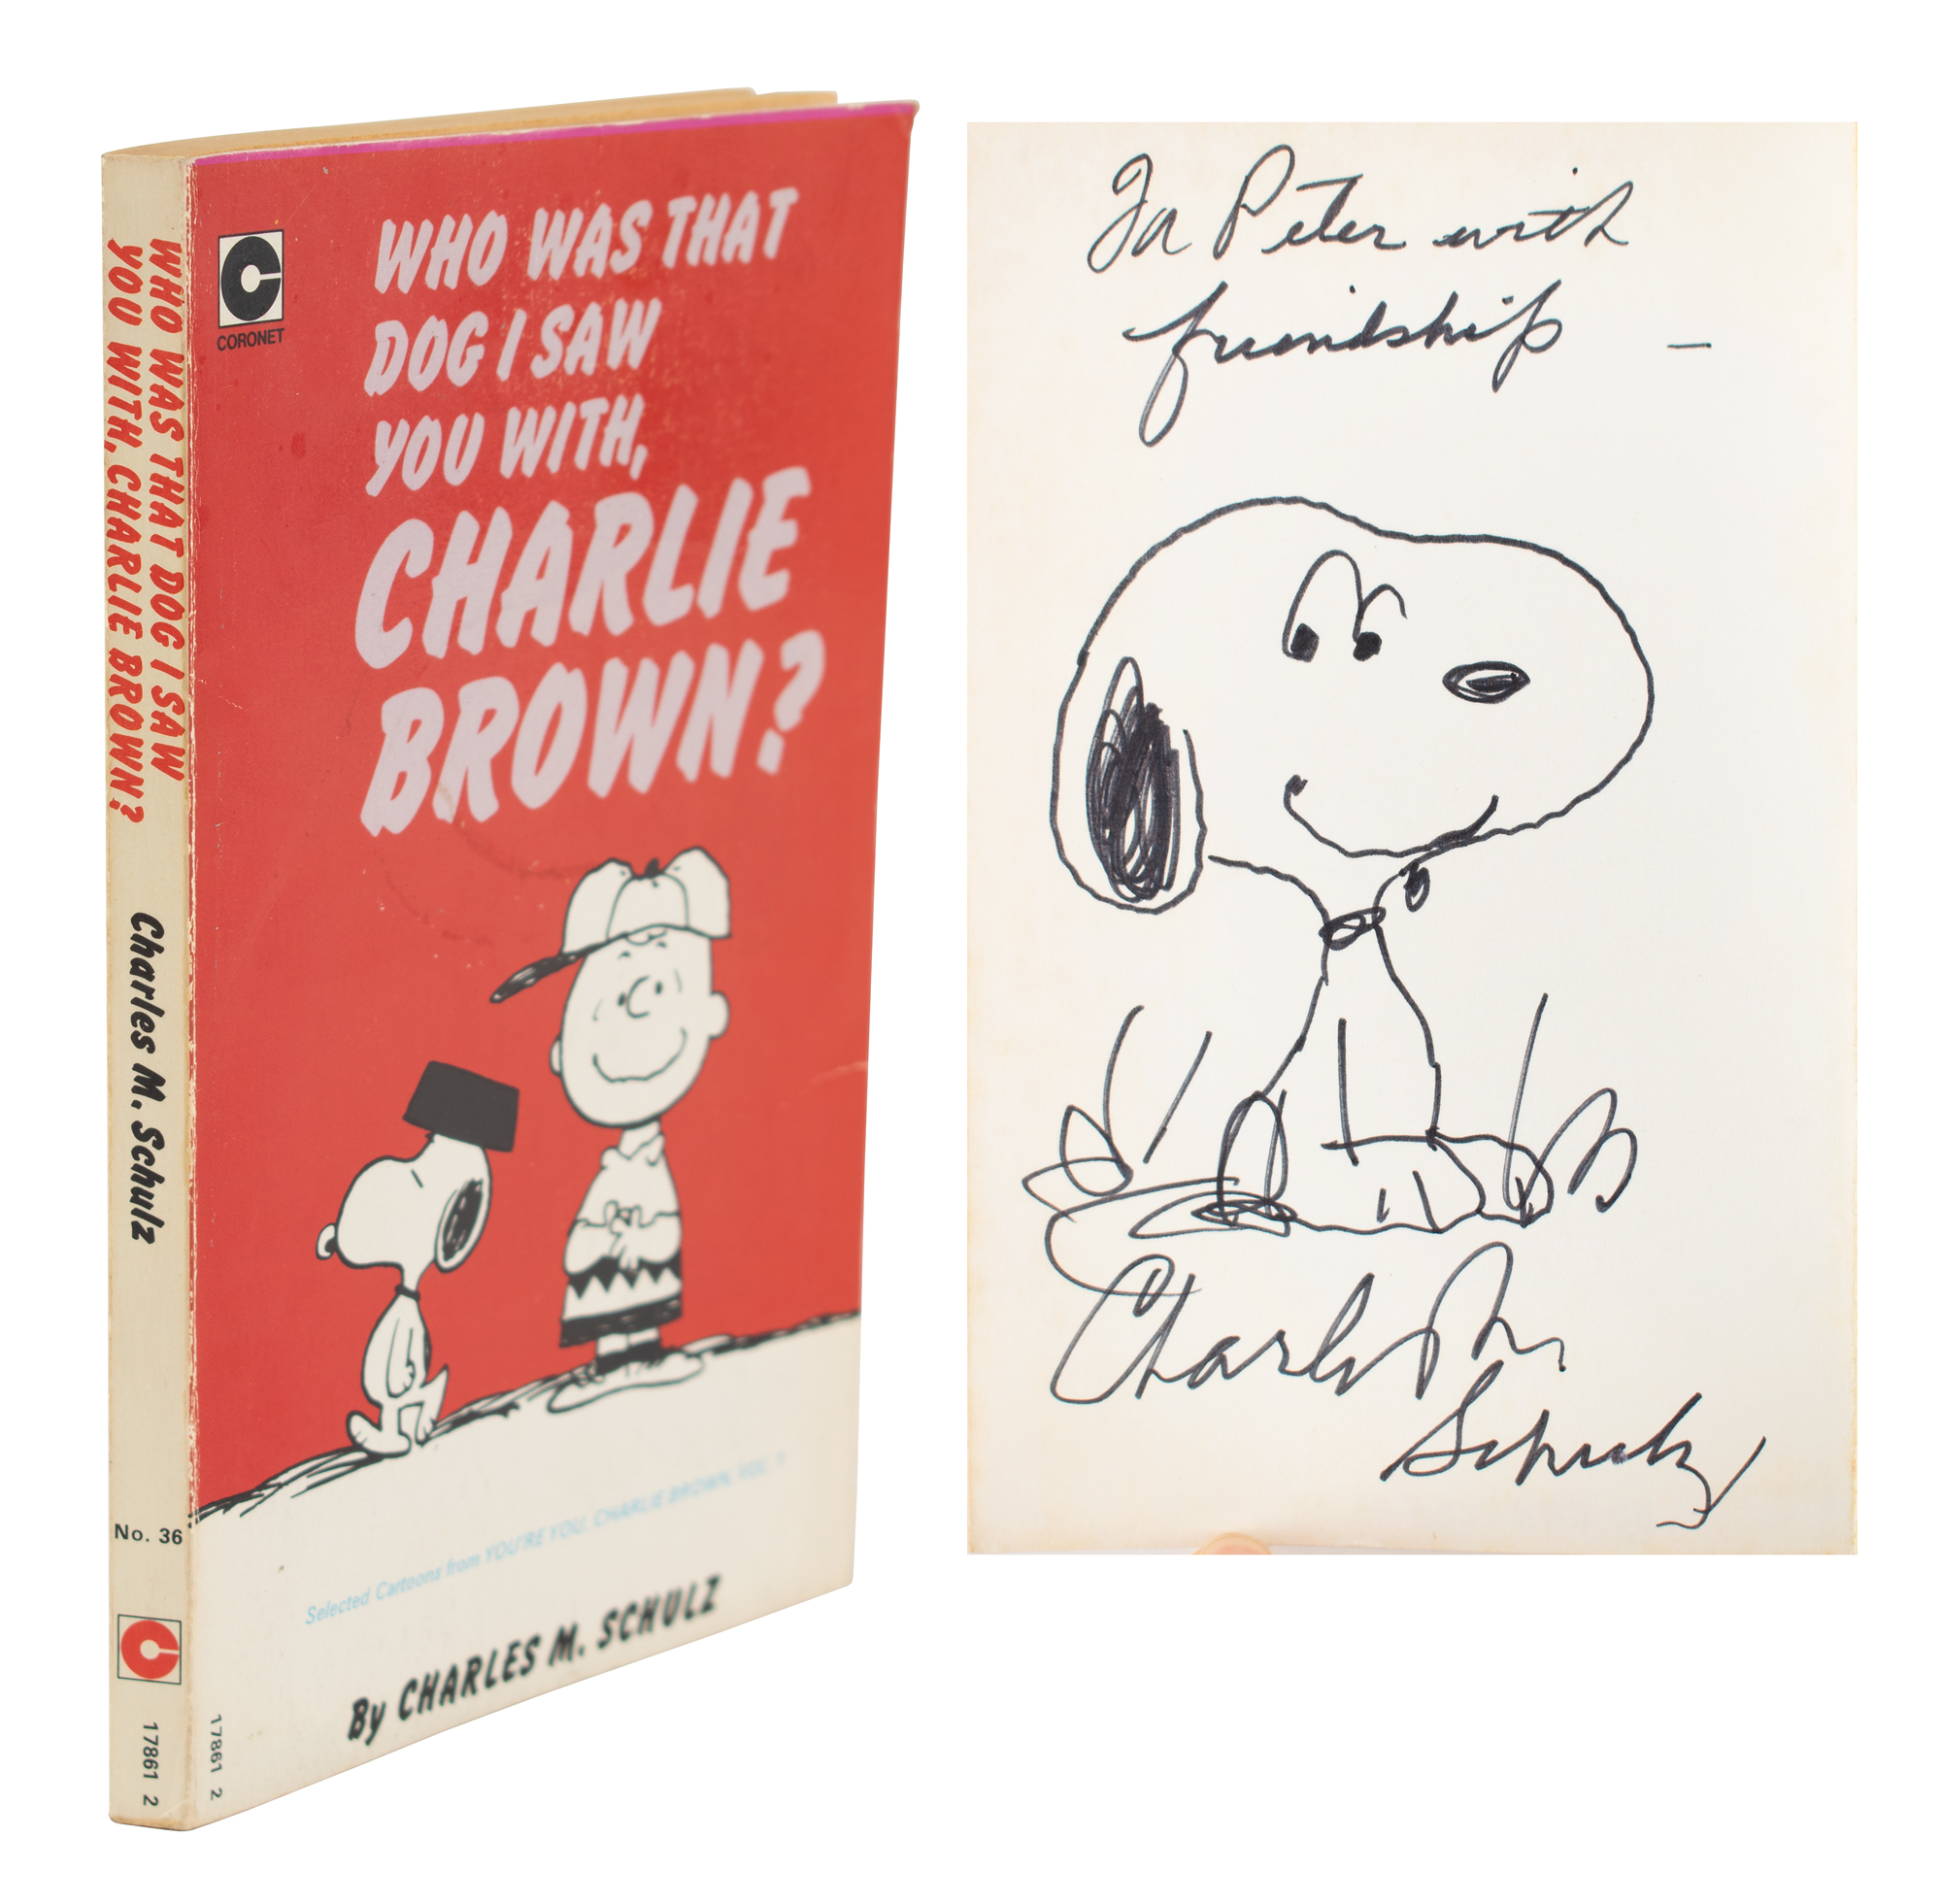 Lot #1051 Charles Schulz Signed Book with Sketch